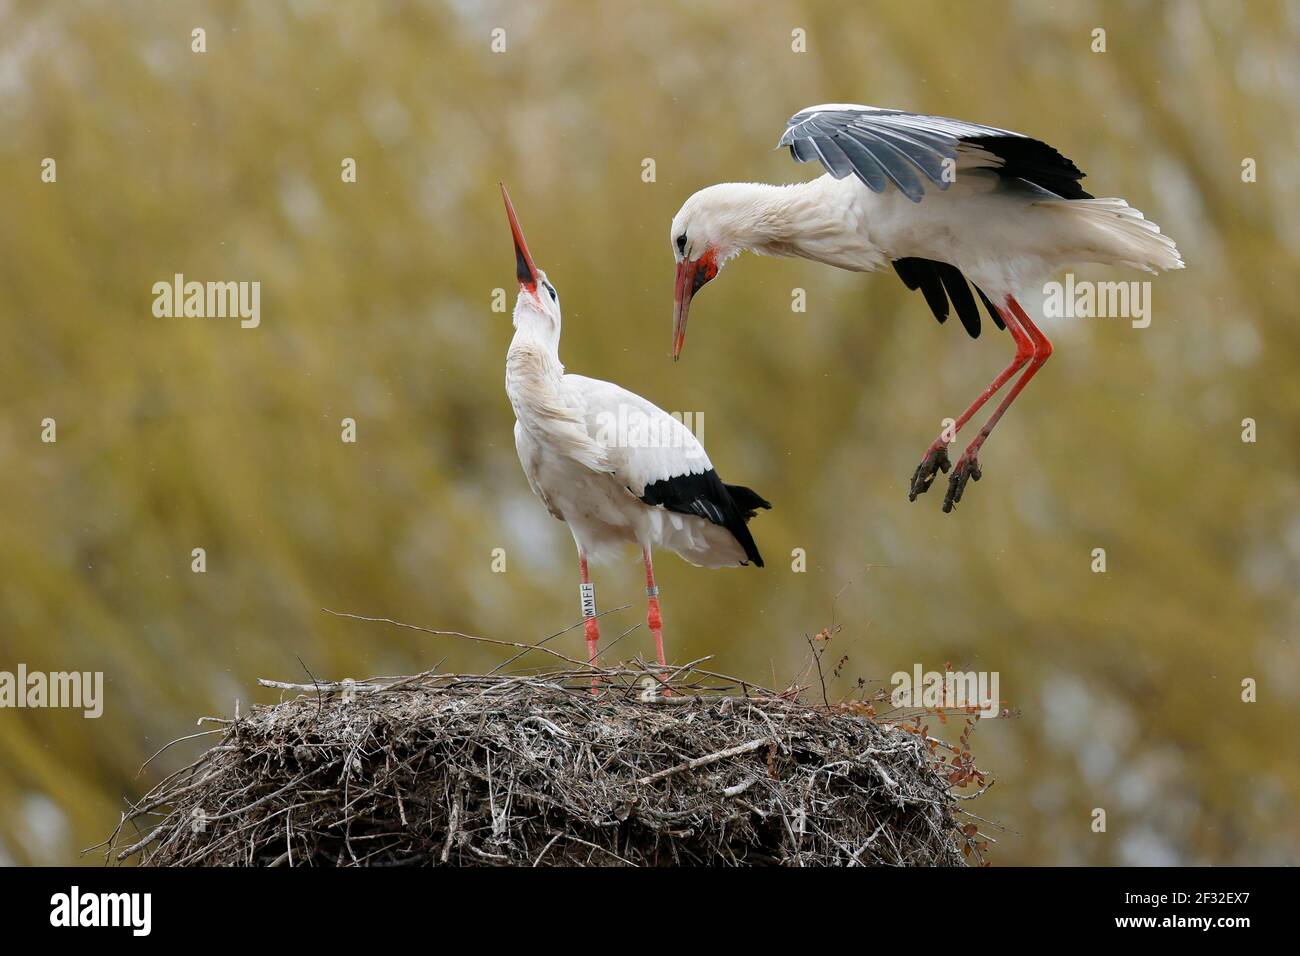 White stork (Ciconia ciconia) in action on the nest, Hesse, Germany Stock Photo